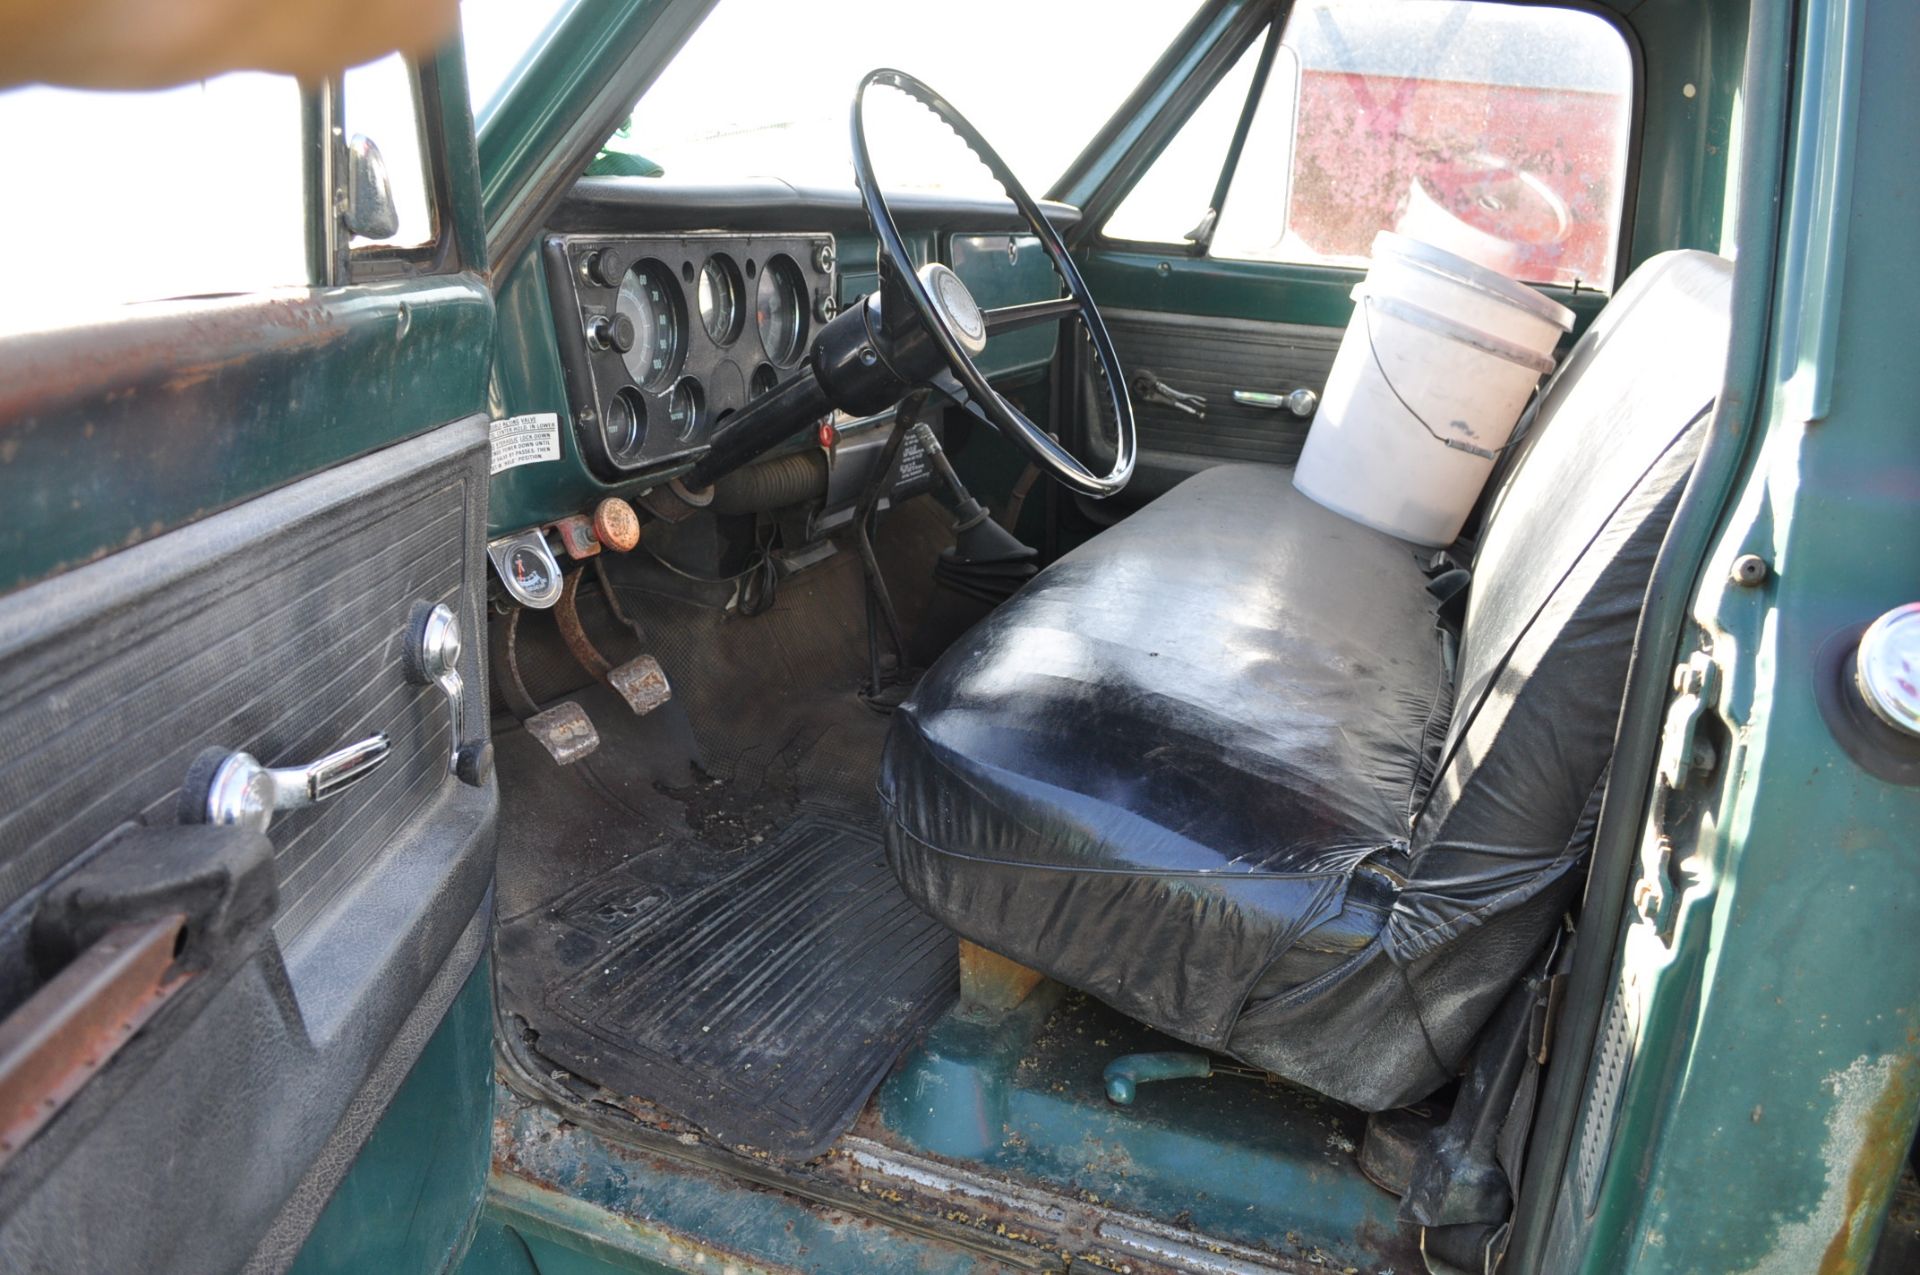 1972 Chevrolet C50 straight truck, V8 gas 350 engine, 5+2, hyd brakes, 8.25-20 tires, 15’ bed w/ - Image 14 of 19